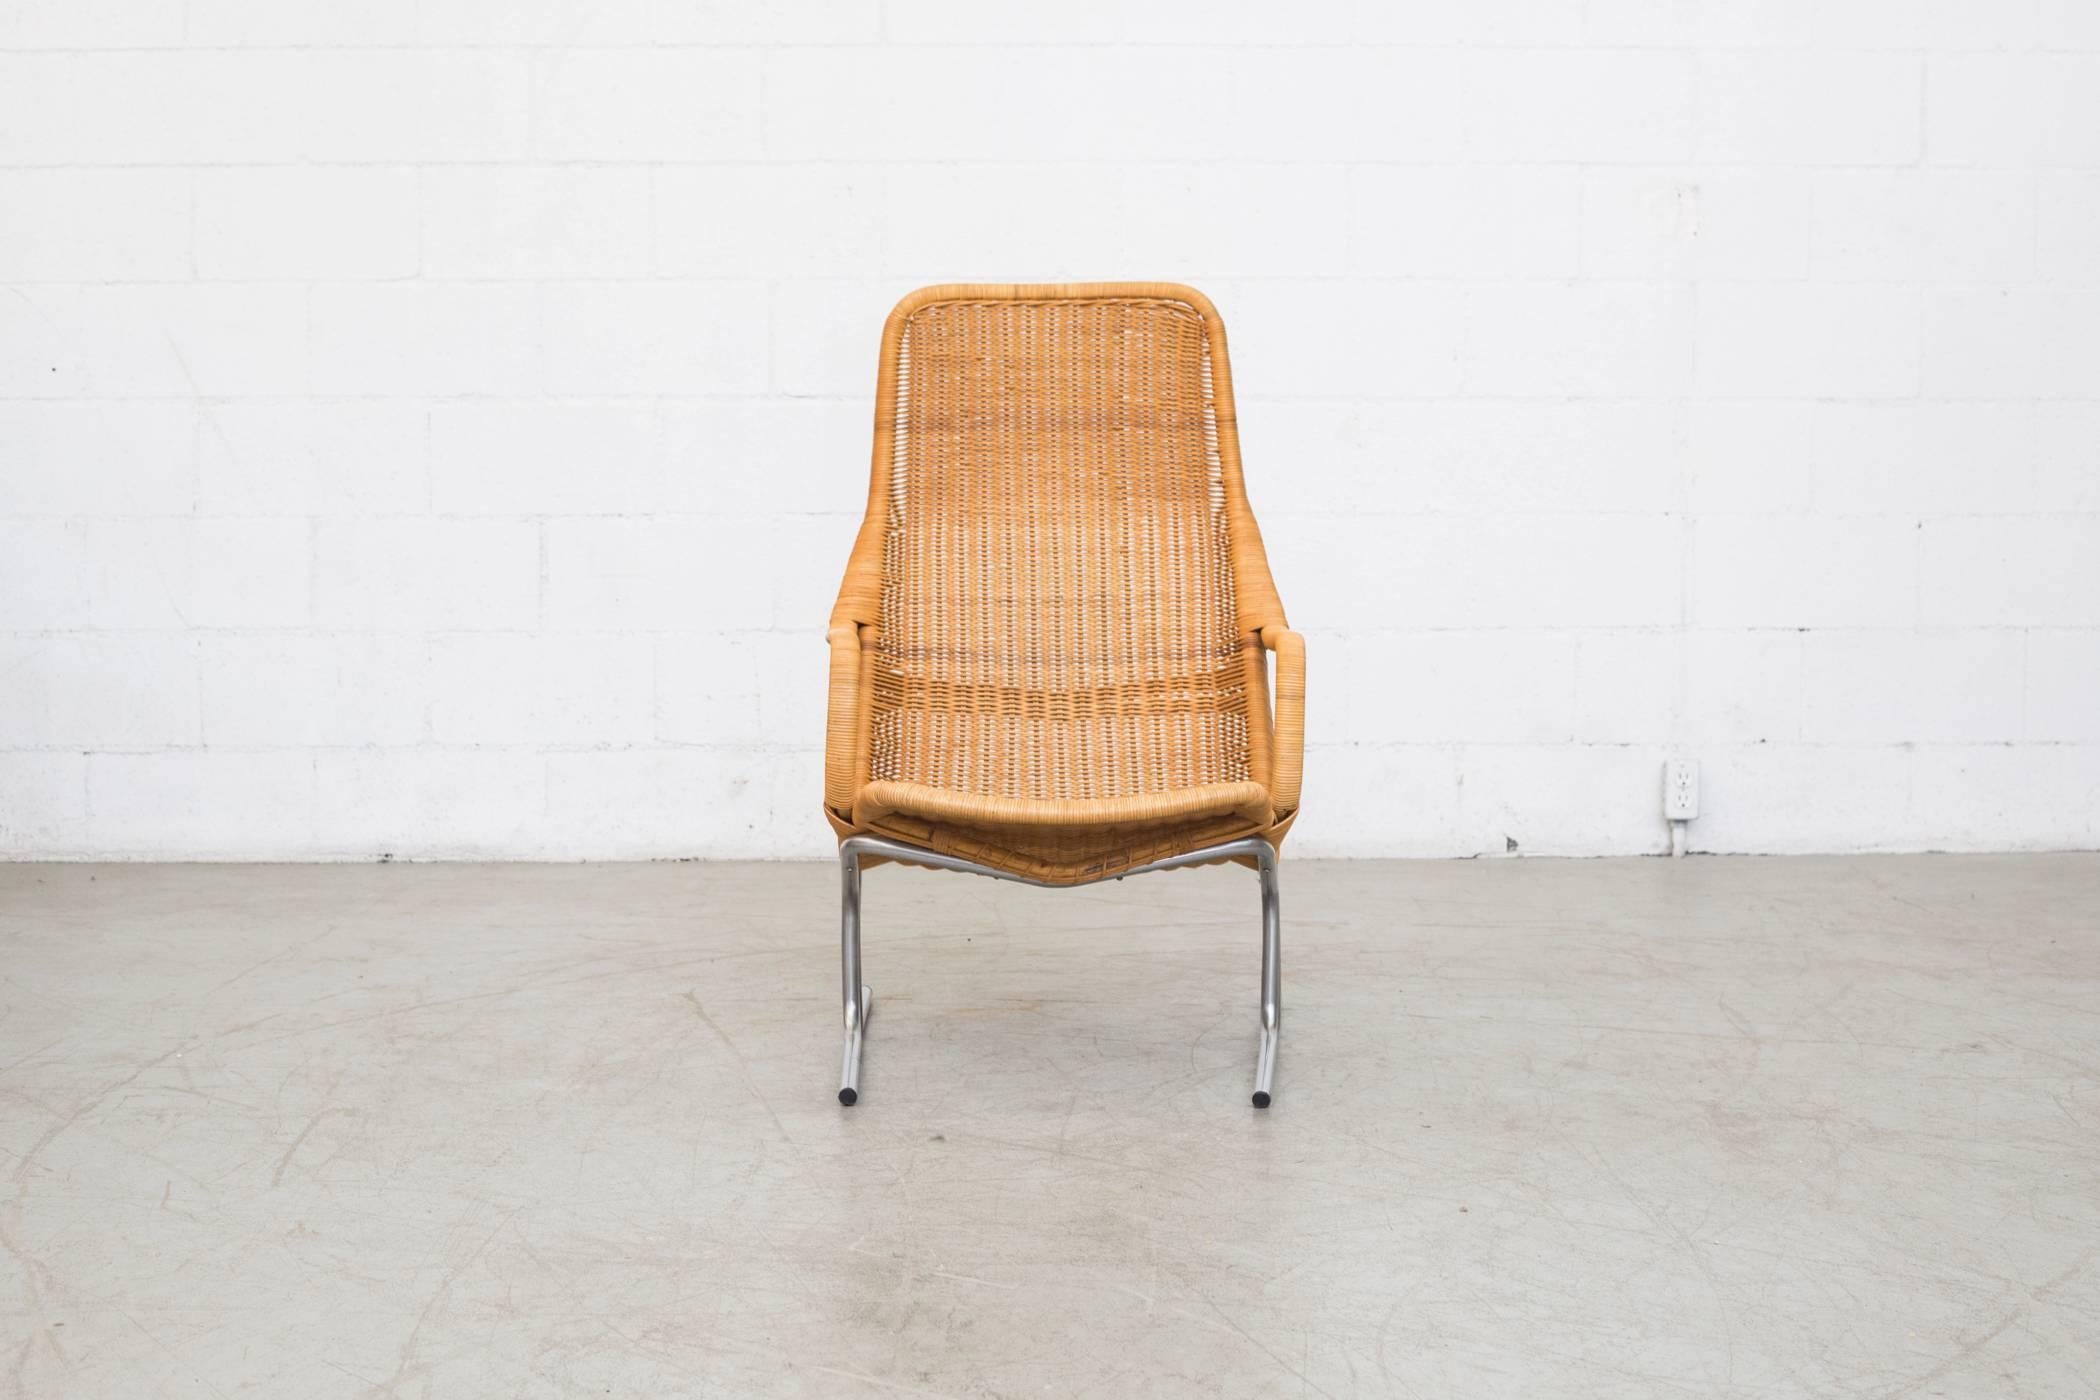 Awesome woven rattan lounge chair with chrome tubular metal frame with woven rattan seat. Some color variations in rattan weave. Original condition with minimal rattan loss.

